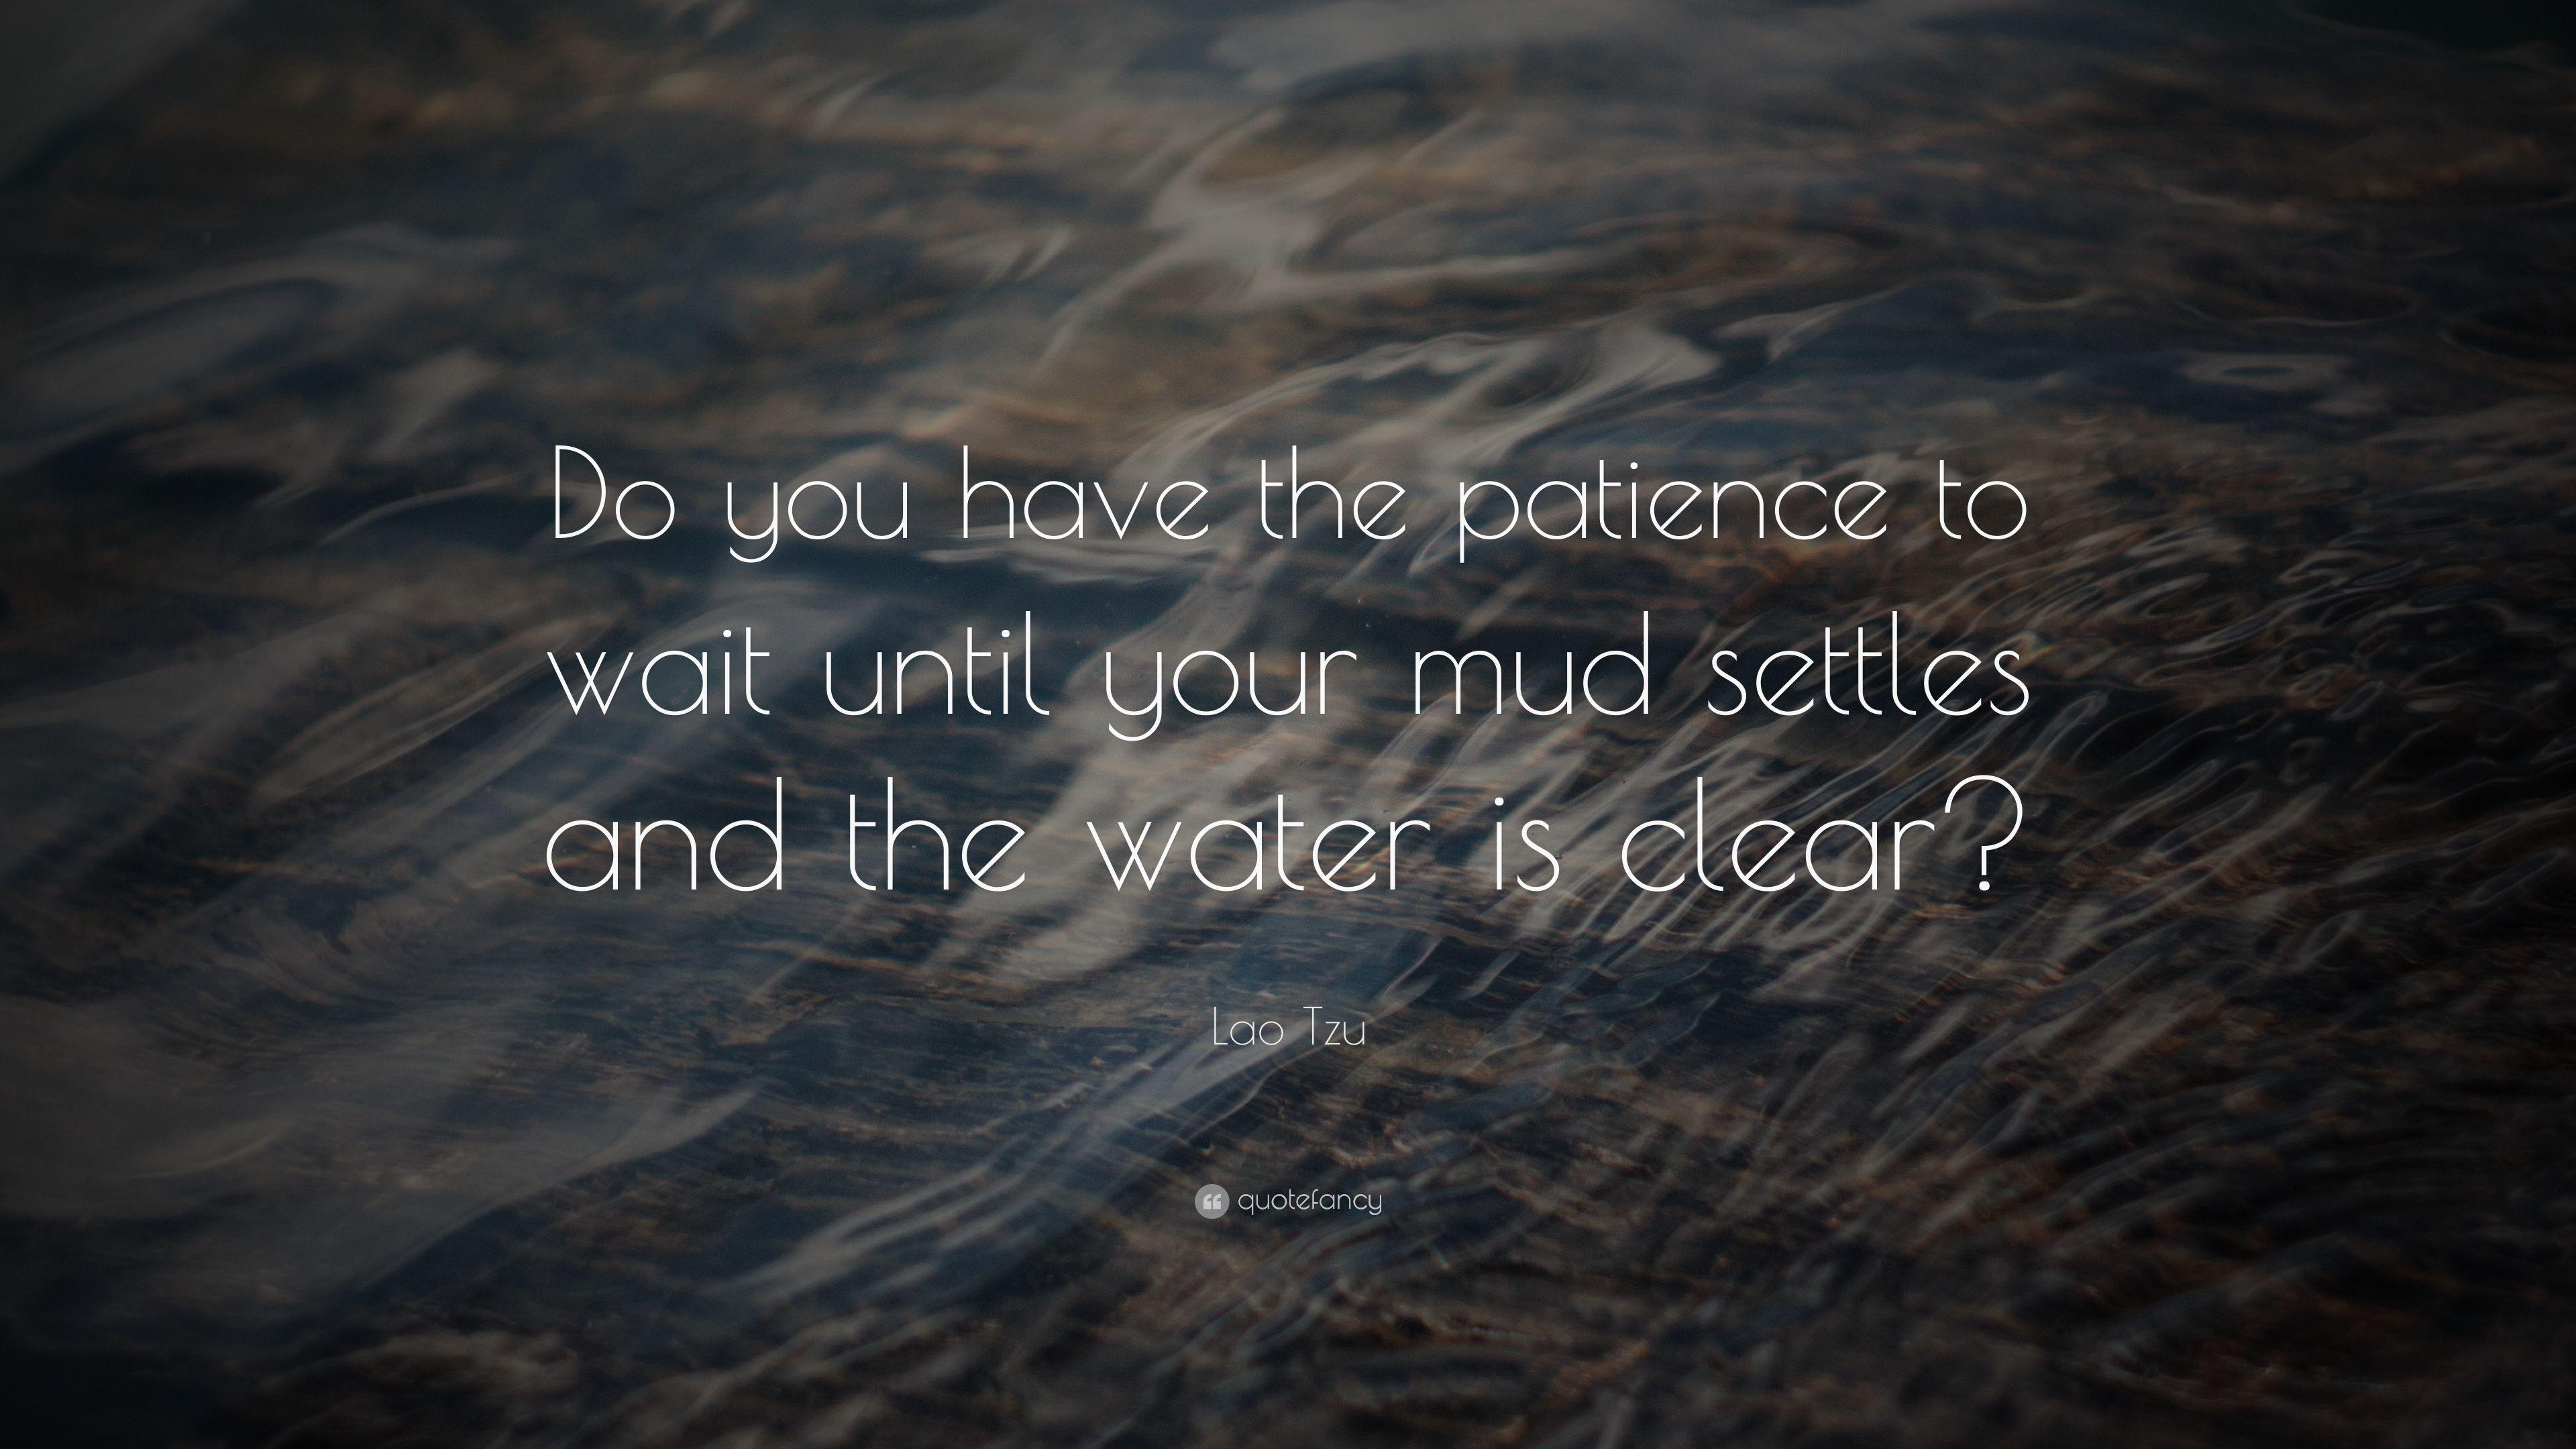 Lao Tzu Quote: “Do you have the patience to wait until your mud